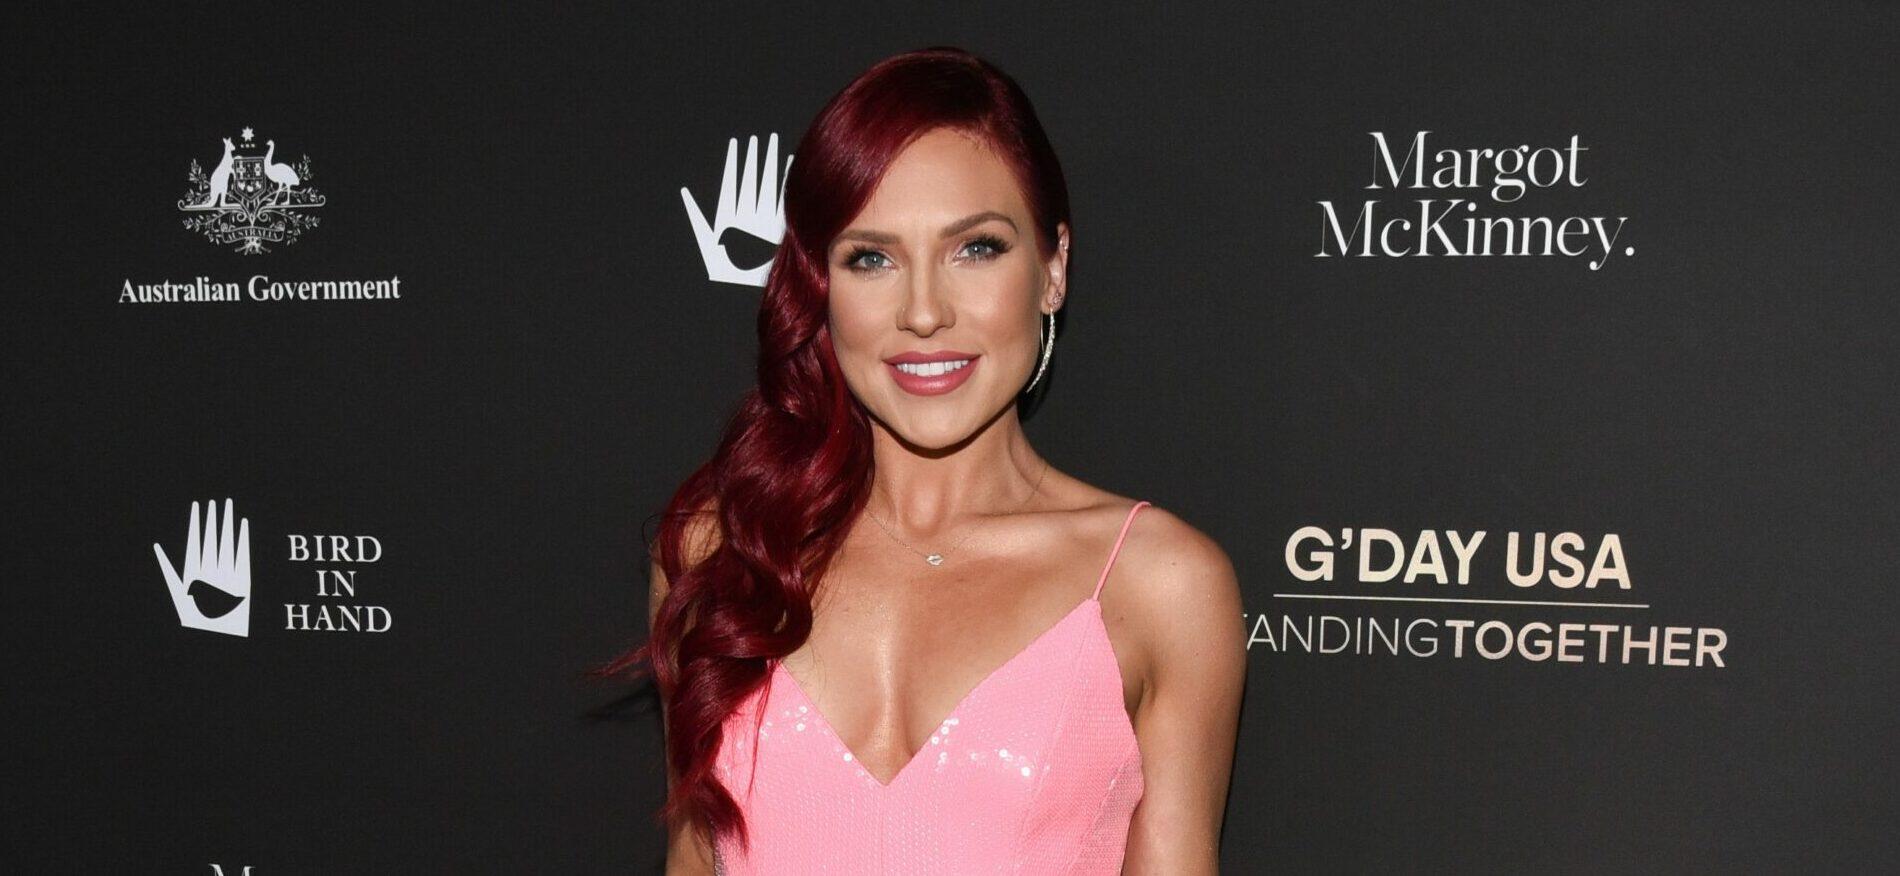 Sharna Burgess Laments Using Filters On Kids: ‘This Fires Me Up’